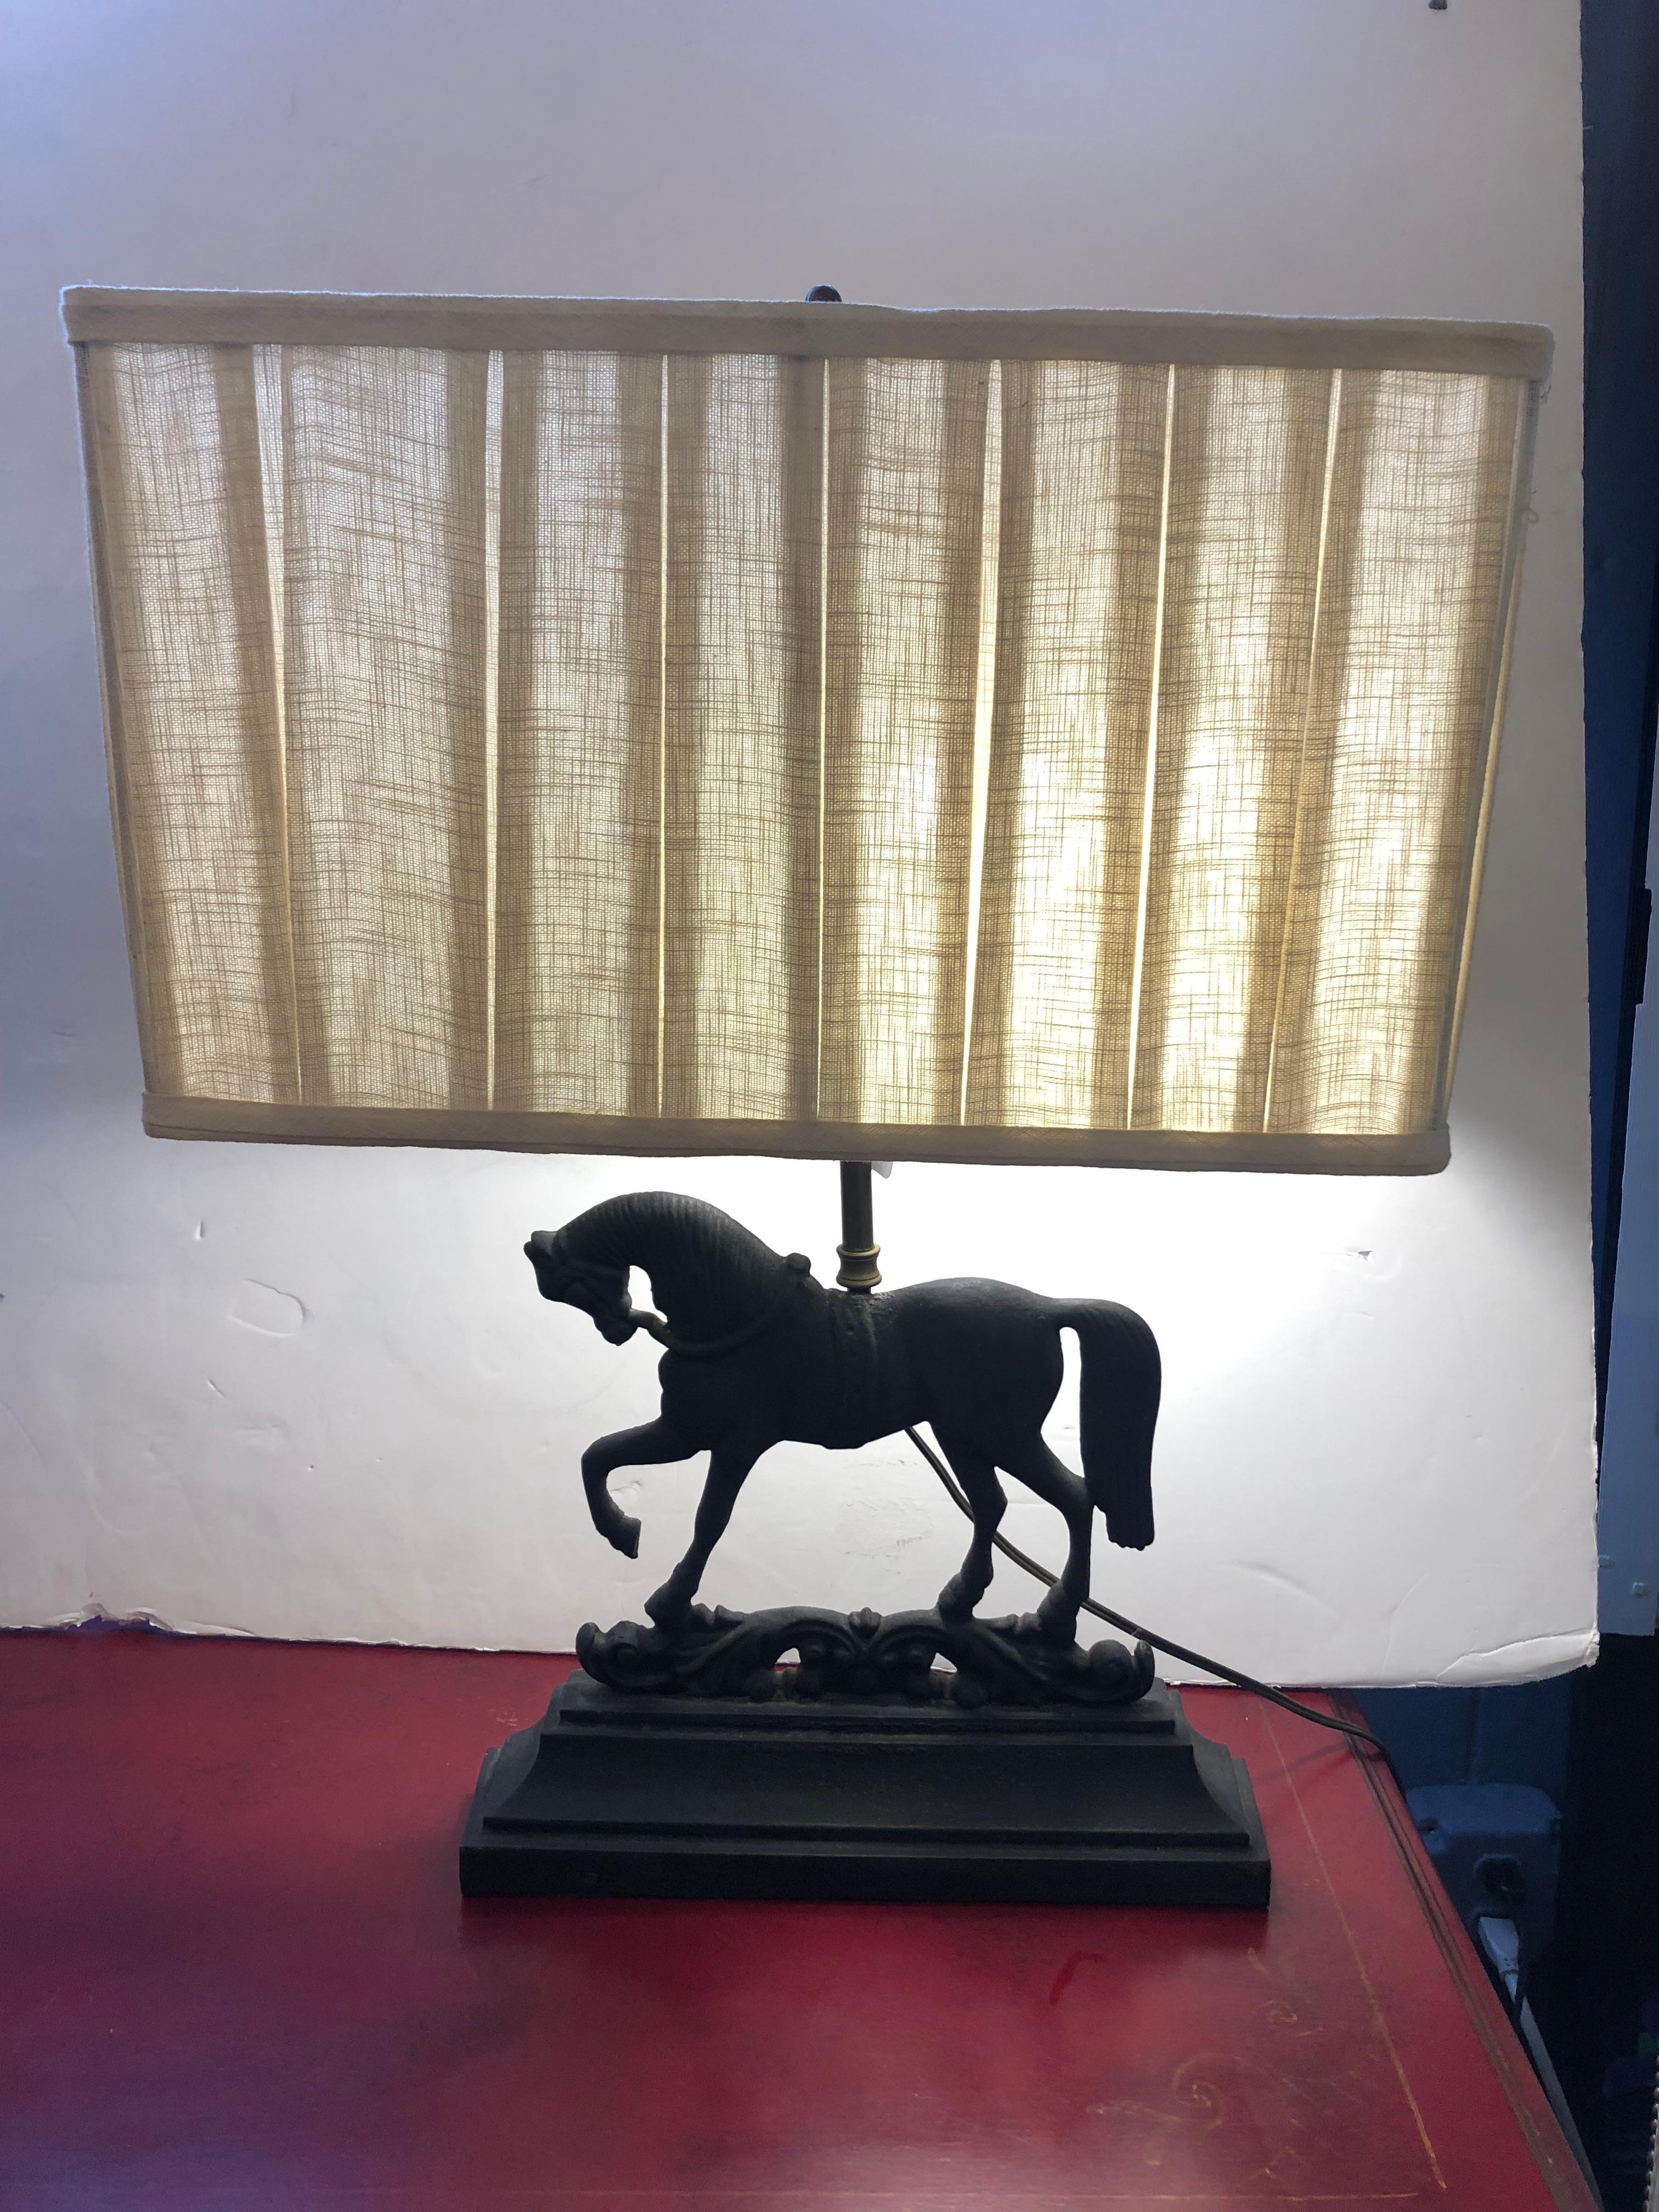 Handsome pair of black wrought iron table lamps having regal horse sculptures in opposing position, each with one leg elegantly lifted. Custom contemporary rectangular pleated shades are included.
The lamp itself is 13.5 W x 7 D.